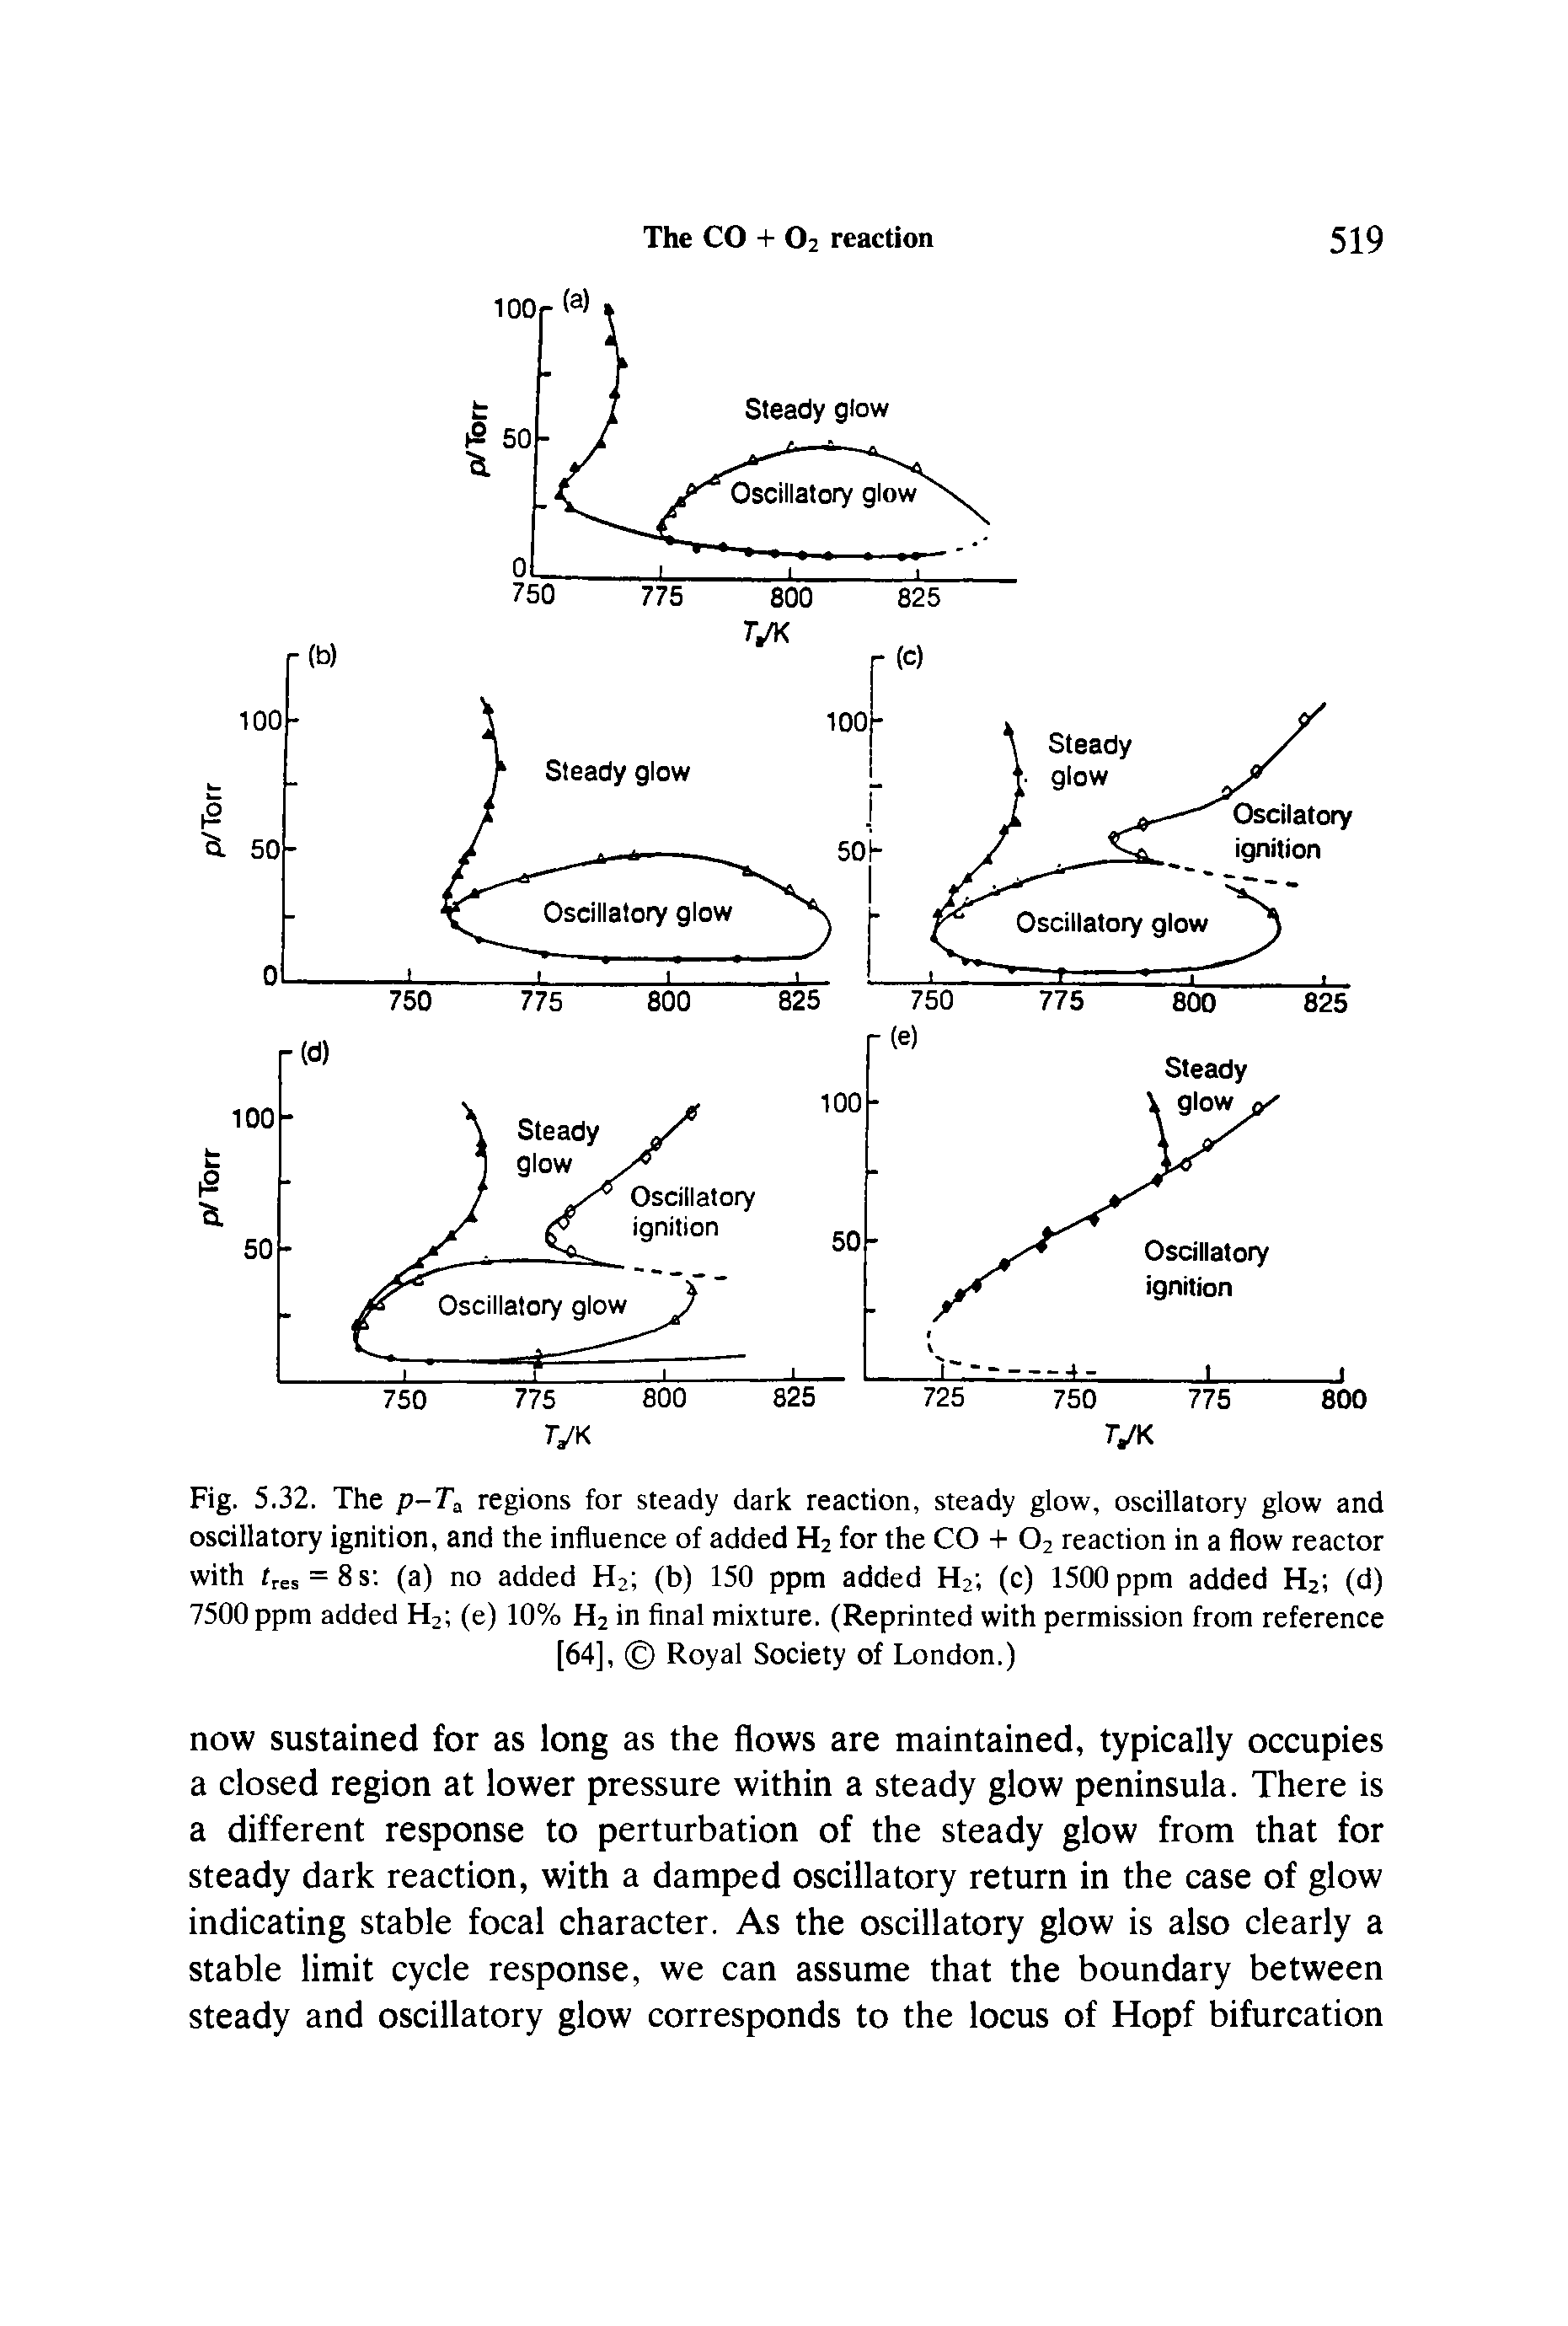 Fig. 5.32. The p-T regions for steady dark reaction, steady glow, oscillatory glow and oscillatory ignition, and the influence of added H2 for the CO + O2 reaction in a flow reactor with = 8 S , (a) no added H2 (b) 150 ppm added H2 (c) 1500 ppm added H2 (d) 7500 ppm added H2 (e) 10% H2 in final mixture. (Reprinted with permission from reference [64], Royal Society of London.)...